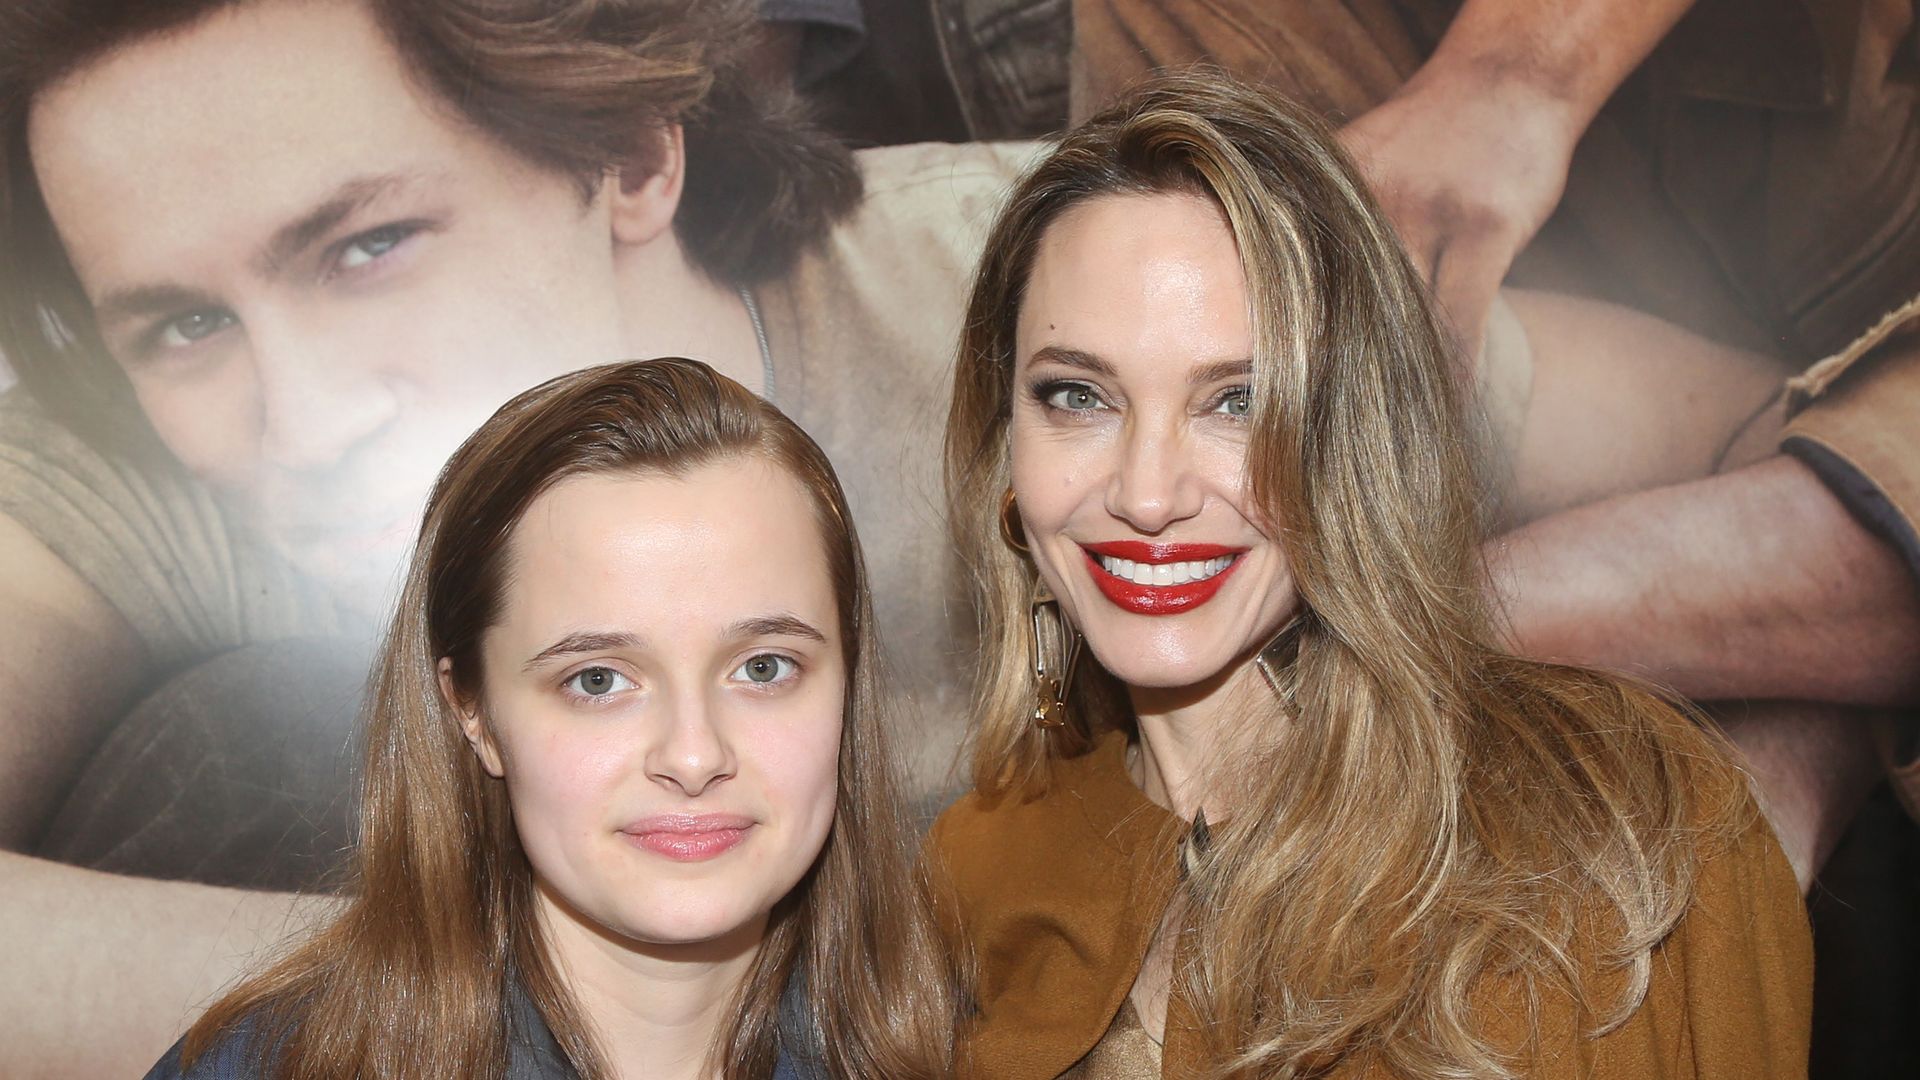 Angelina Jolie reveals how daughter Vivienne opened up to her through experience that 'deeply' impacted them